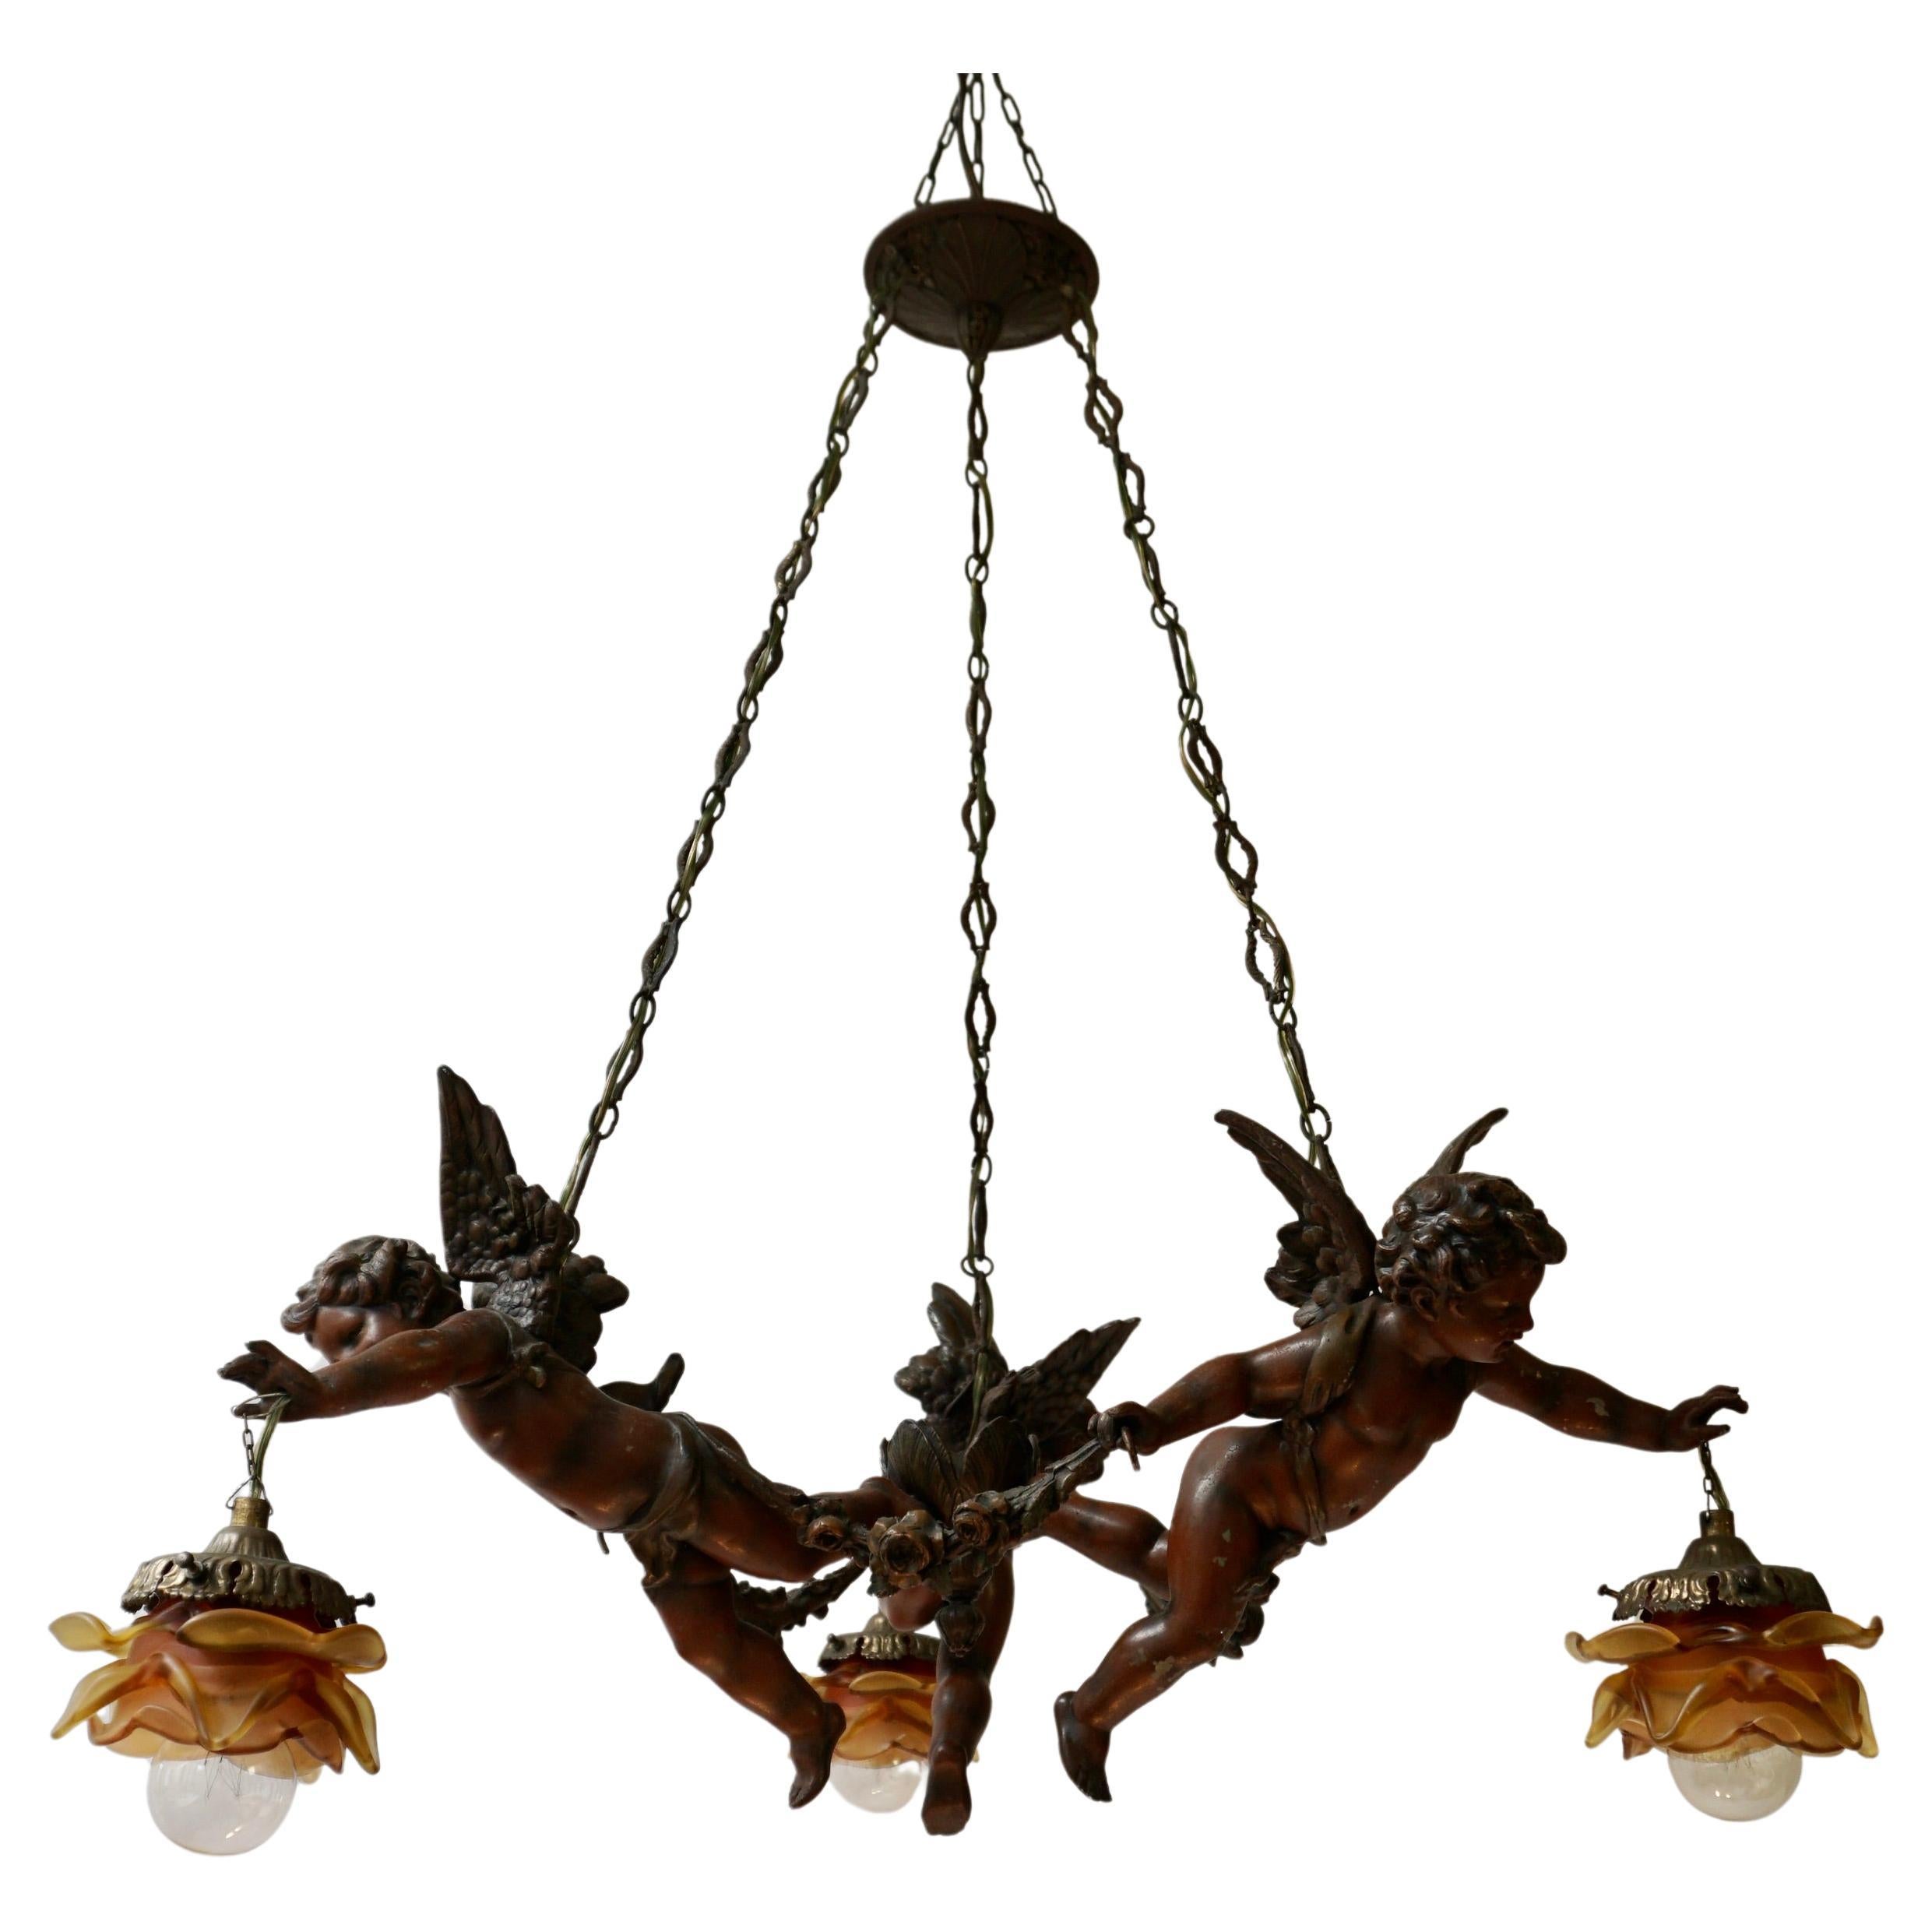 A French three-light chandelier from the 19th century, with ribbons and cherubs holding the shades. Born in France during the early 20th century, this three-light chandelier features a ribbon-tied canopy, supporting profiled links. The lower section